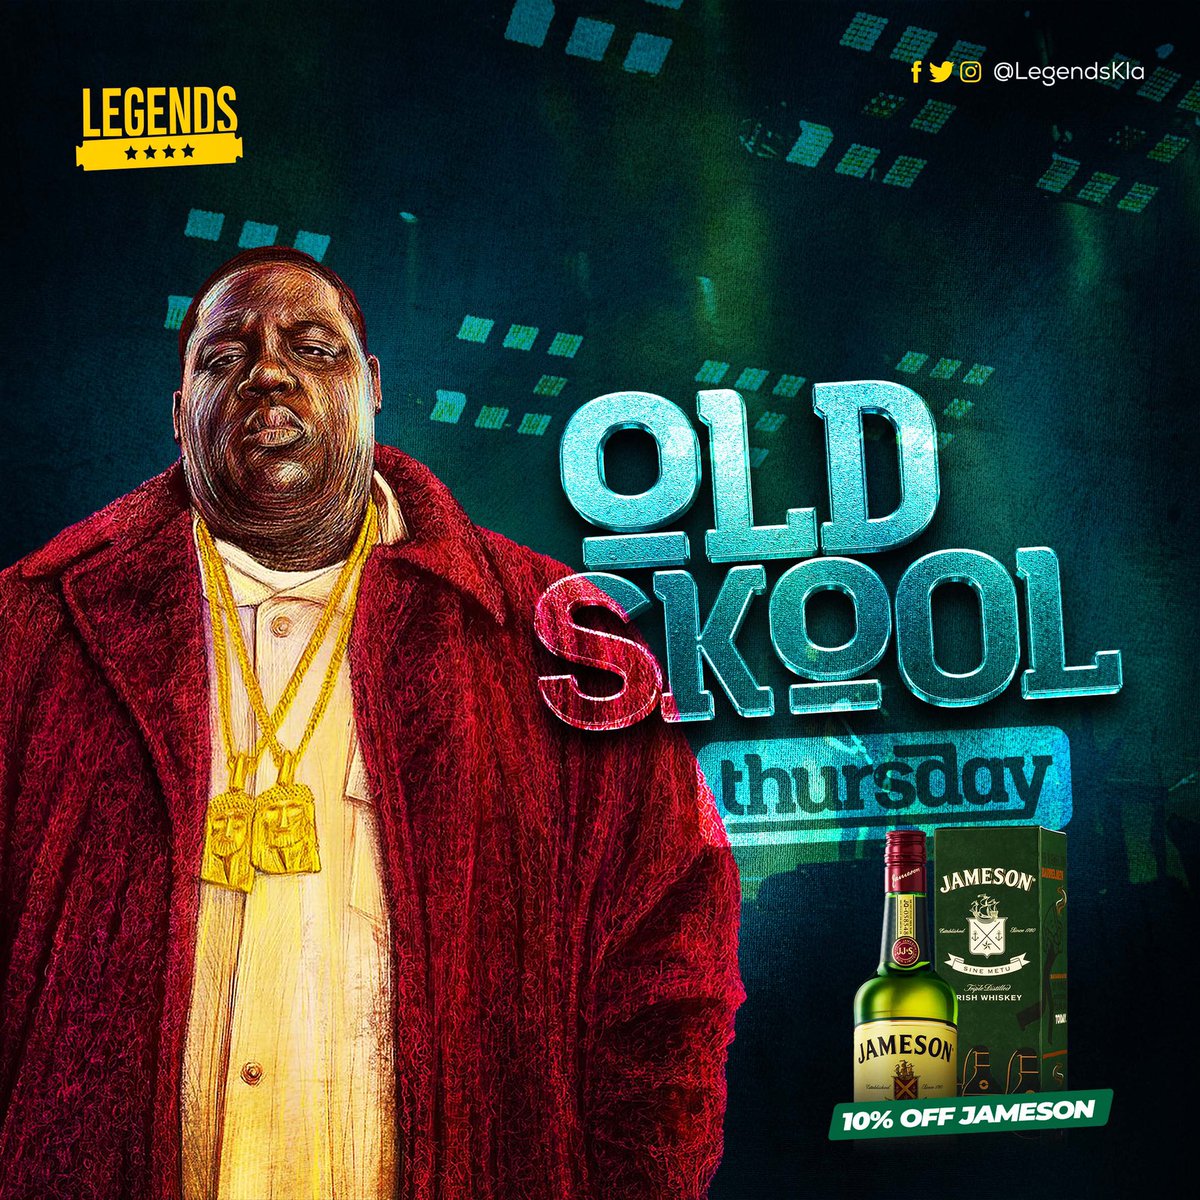 Throwing it back with the ultimate playlist of classic hits tonight in our #OldSkoolThursday party 🔥🔥

Join us for discounted drinks & good vibes. #ThrowbackThursday #OldSchool #TBT